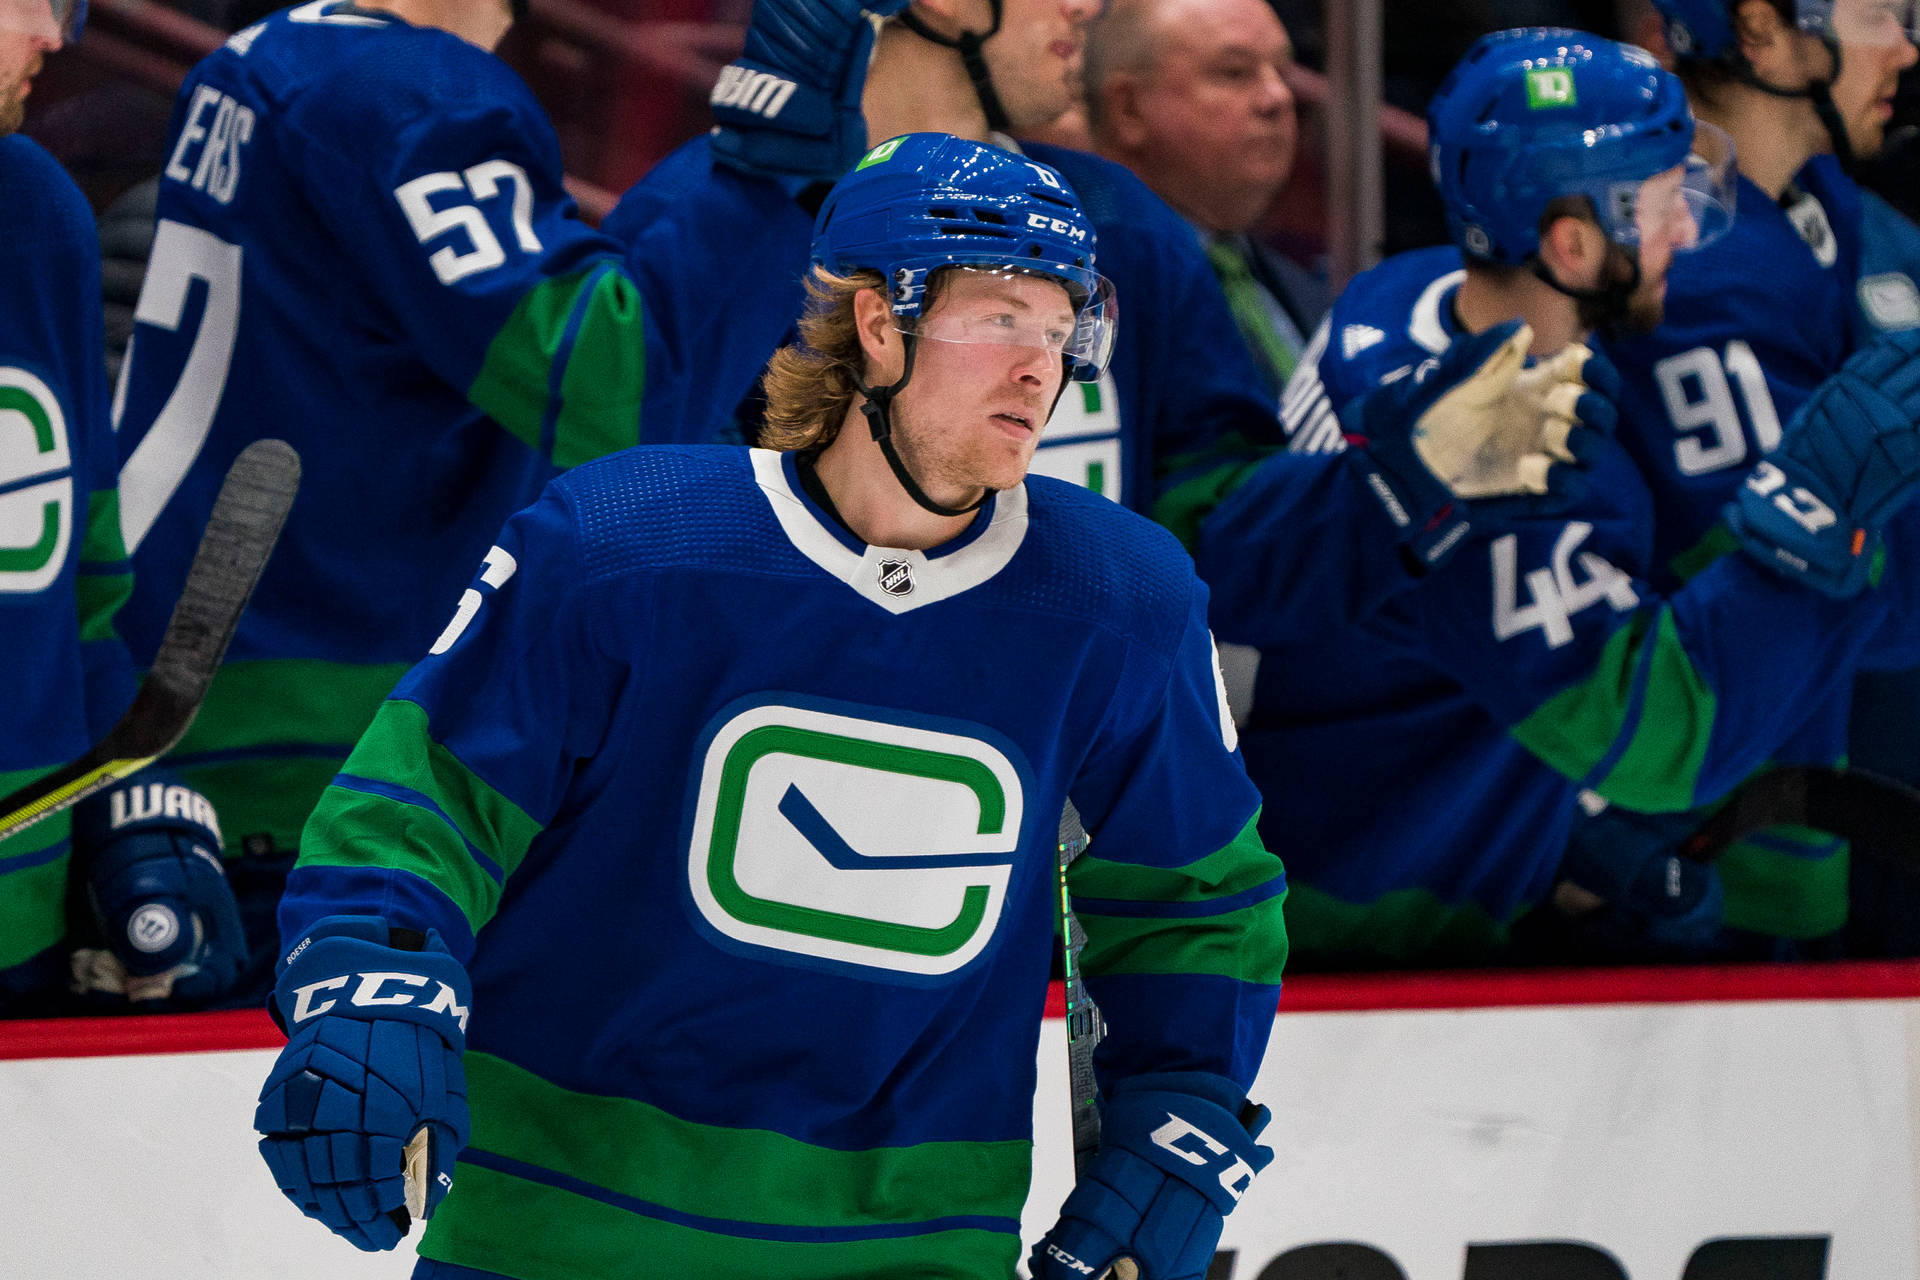 Vancouver Canucks Star Player Brock Boeser In Action